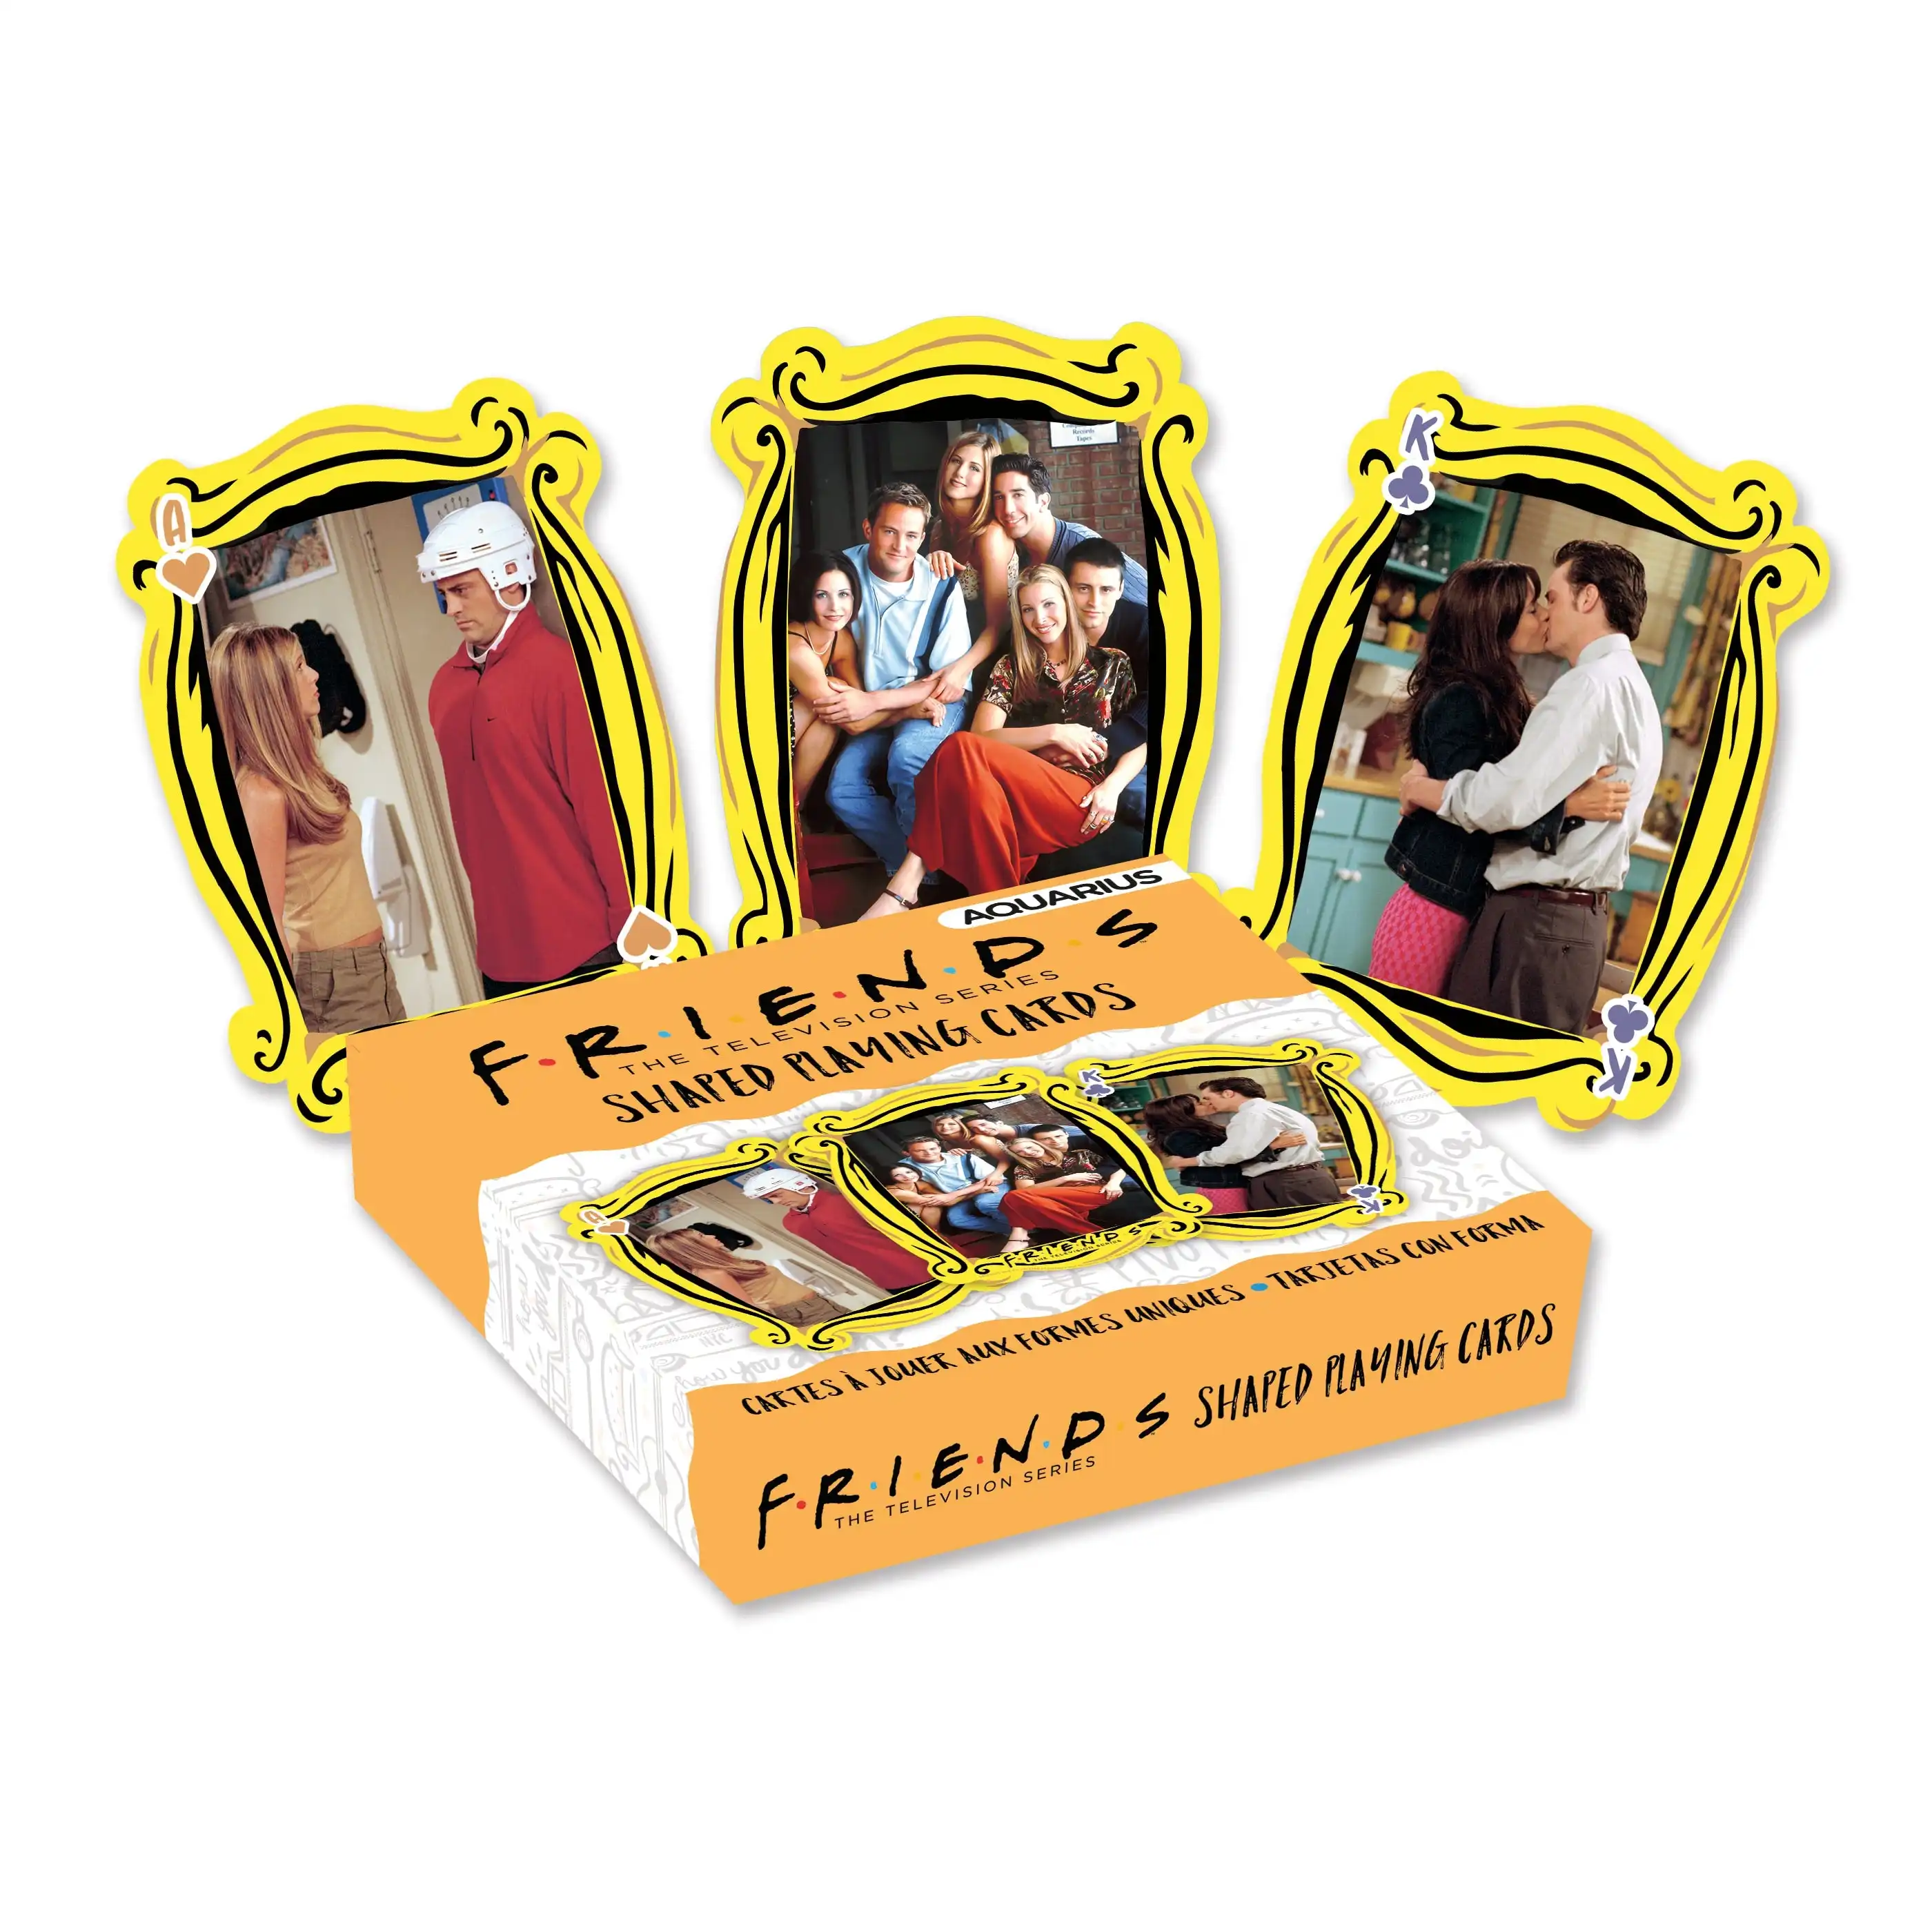 Friends Shaped Playing Cards